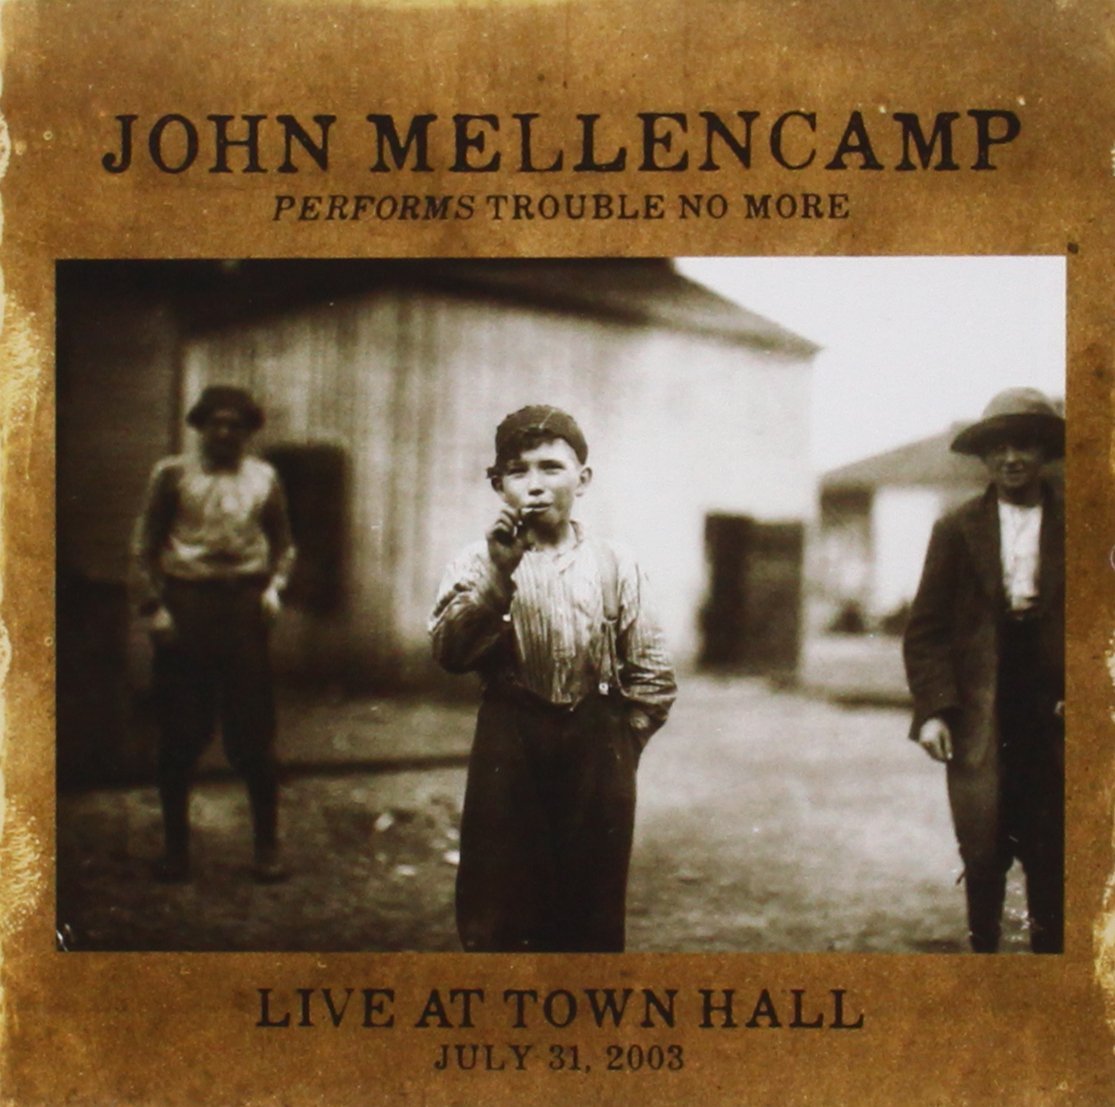 John Mellencamp – Performs 'Trouble No More' Live At Town Hall – Elmore